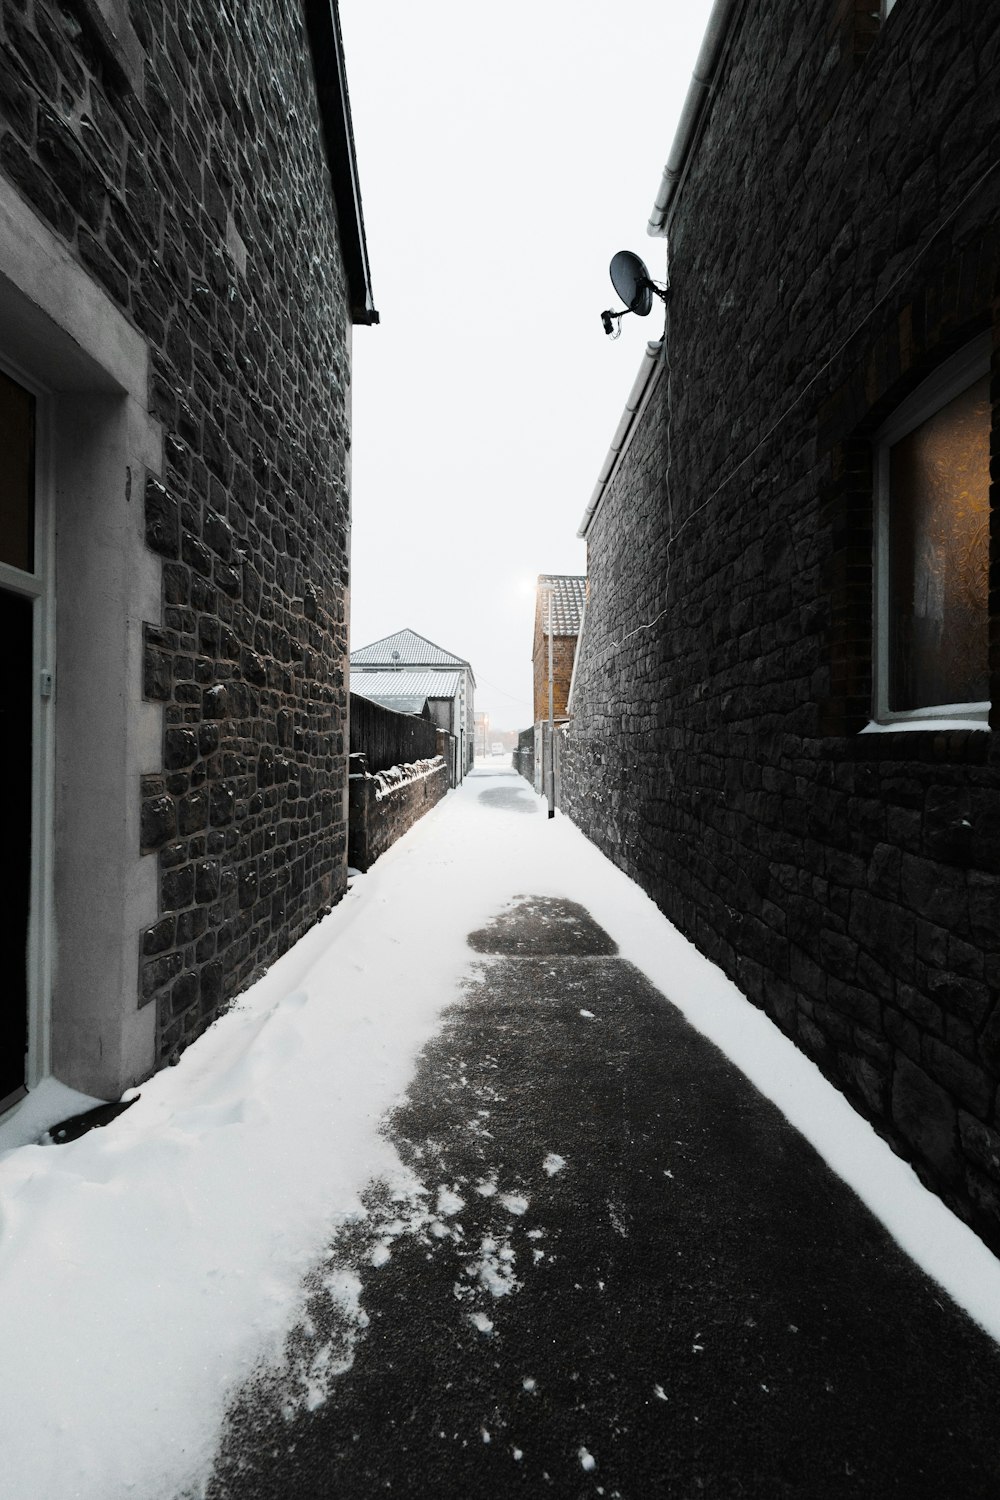 empty pathway in between the houses during daytime